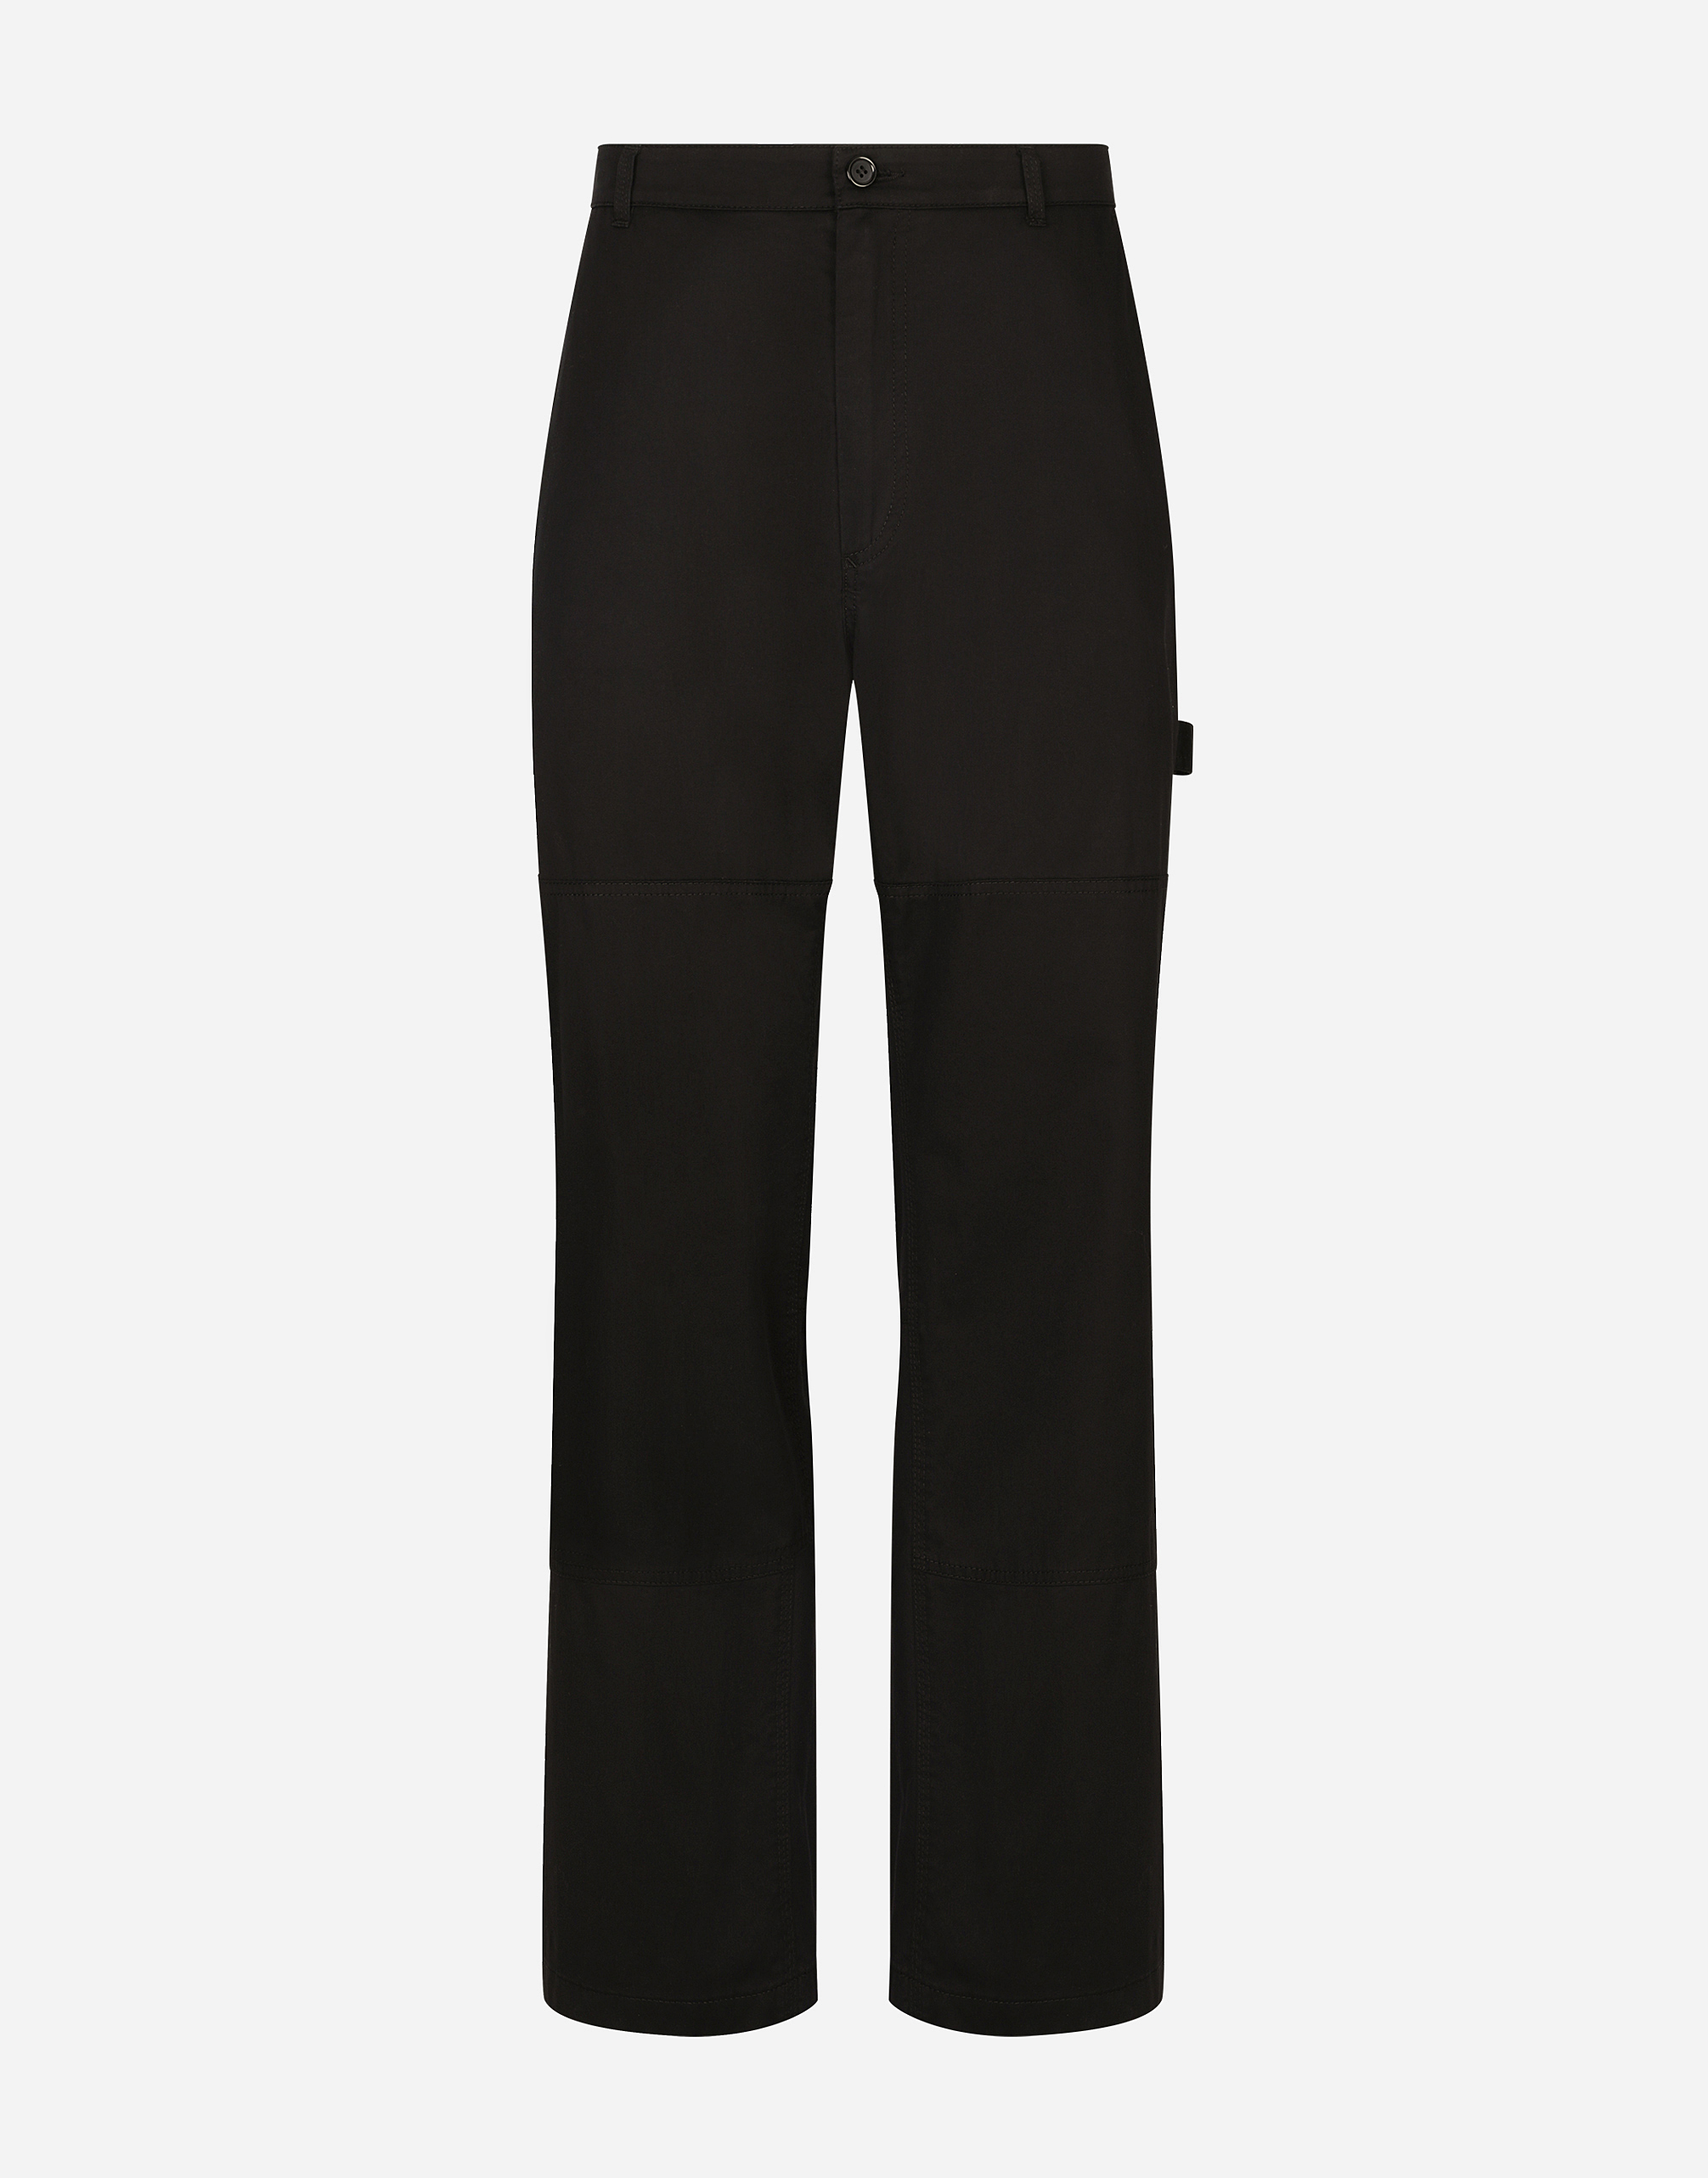 Stretch cotton worker pants with brand plate in Black